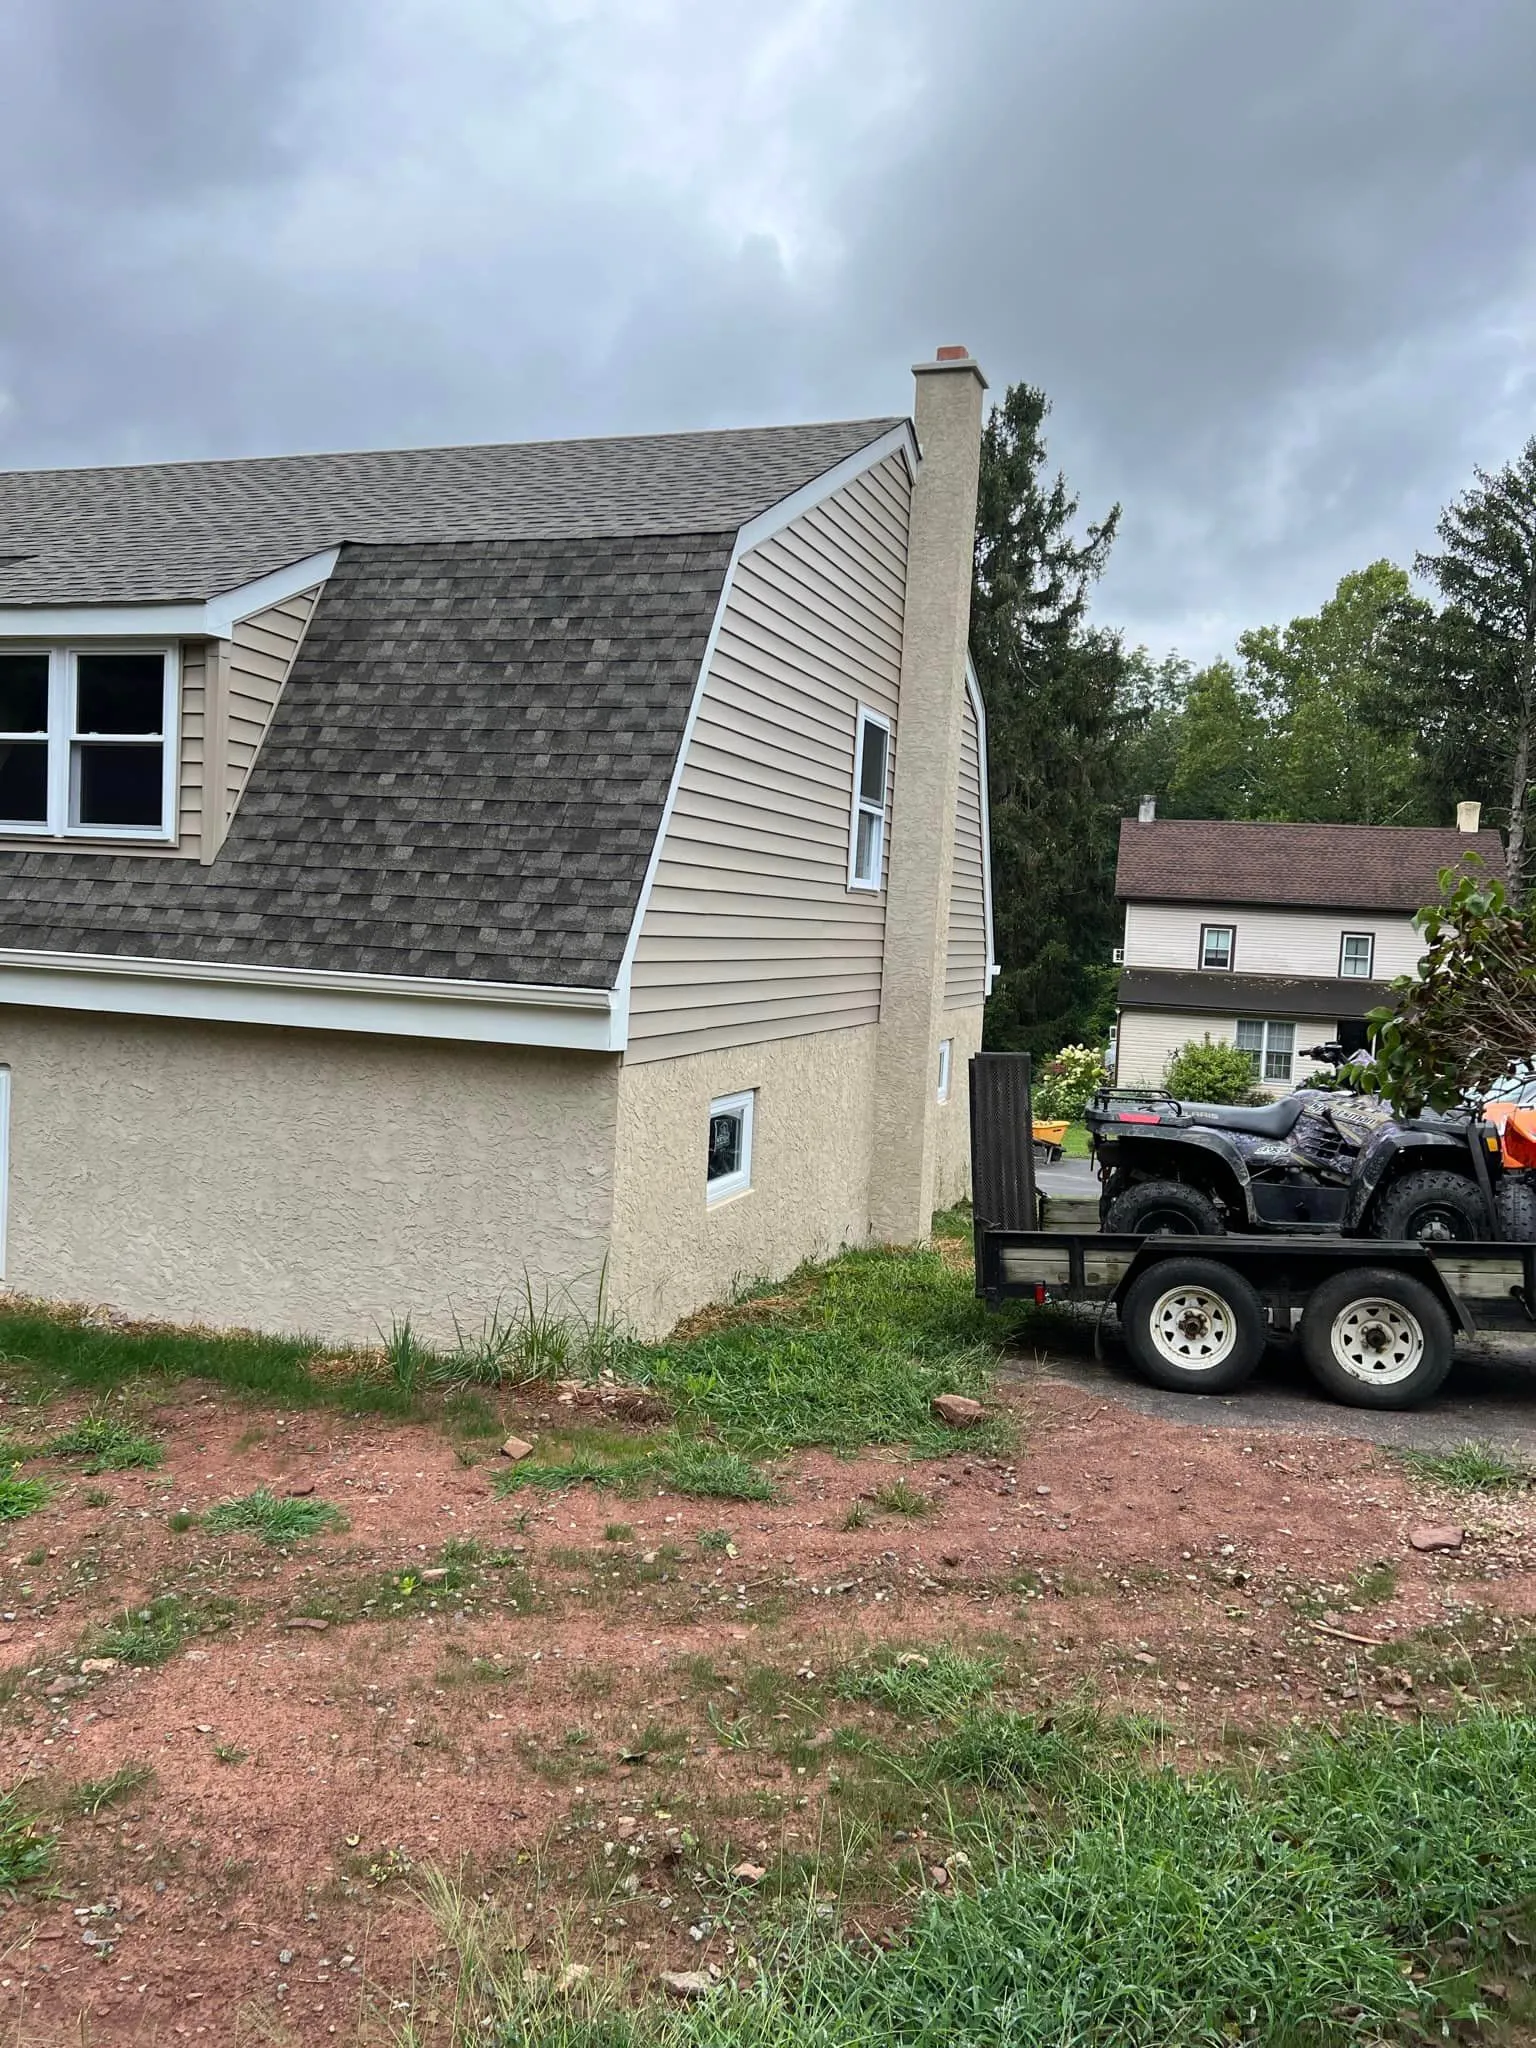 Exterior Painting for GG Painting in Aston, PA